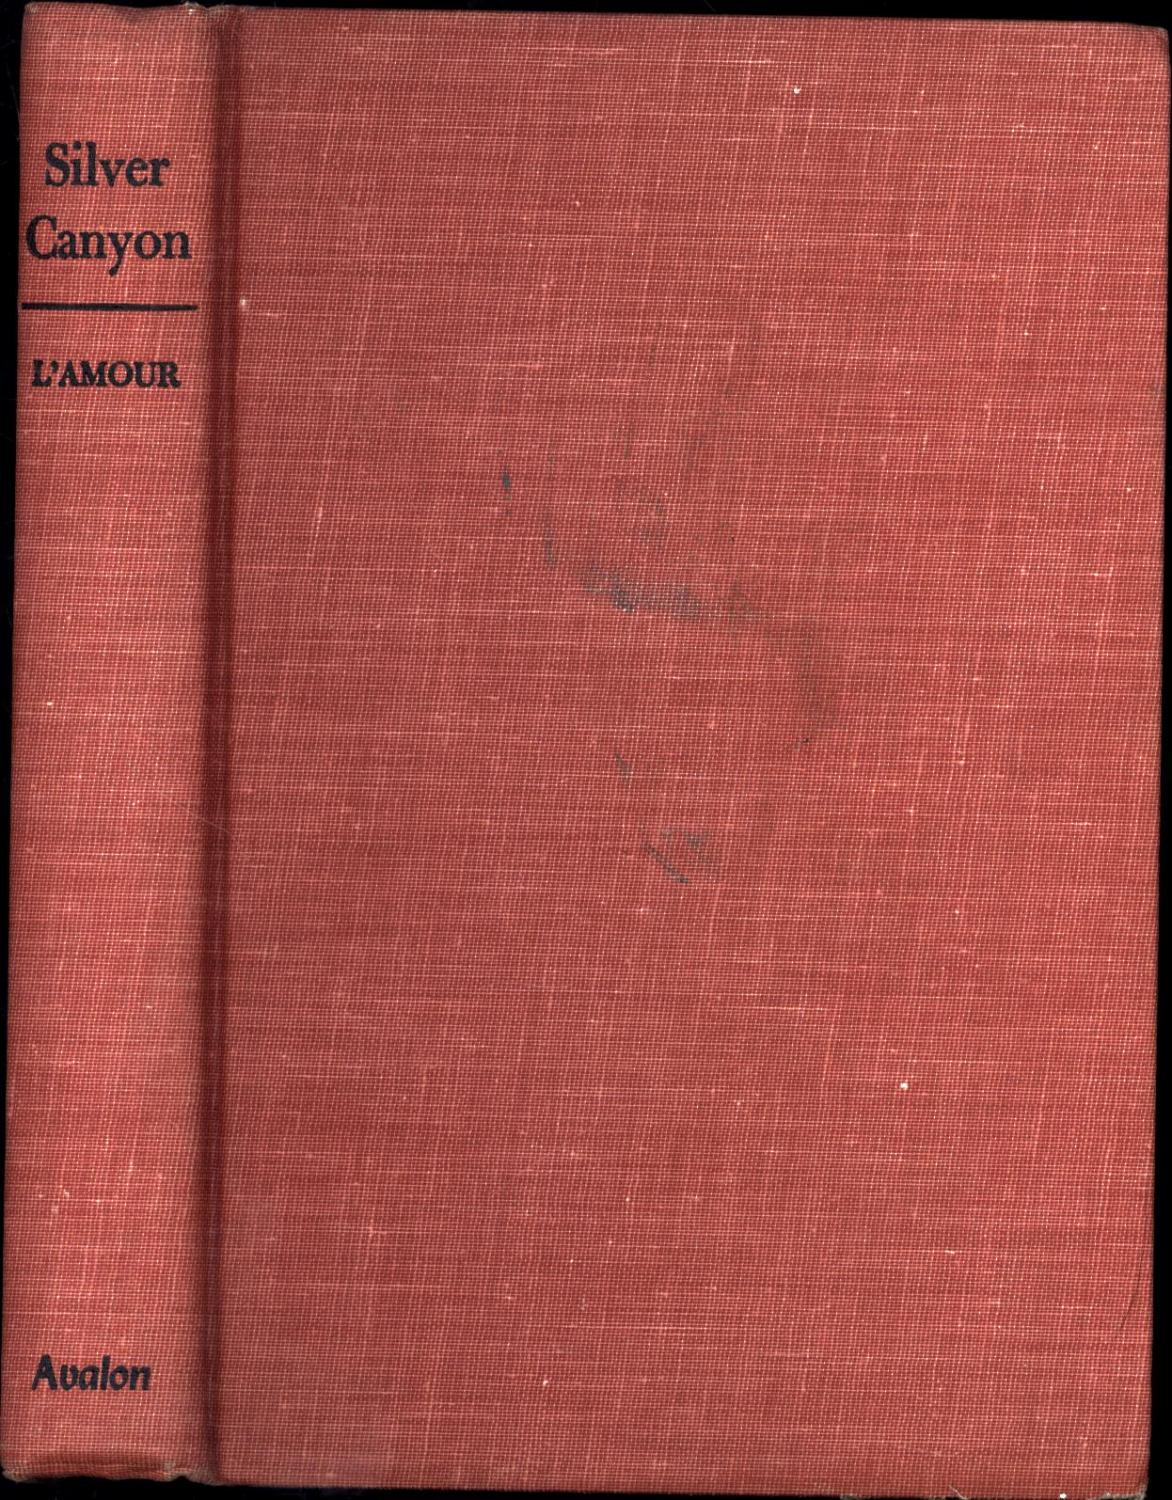 Silver Canyon by L'Amour, Louis: Very Good Hardcover (1956) 1st Edition